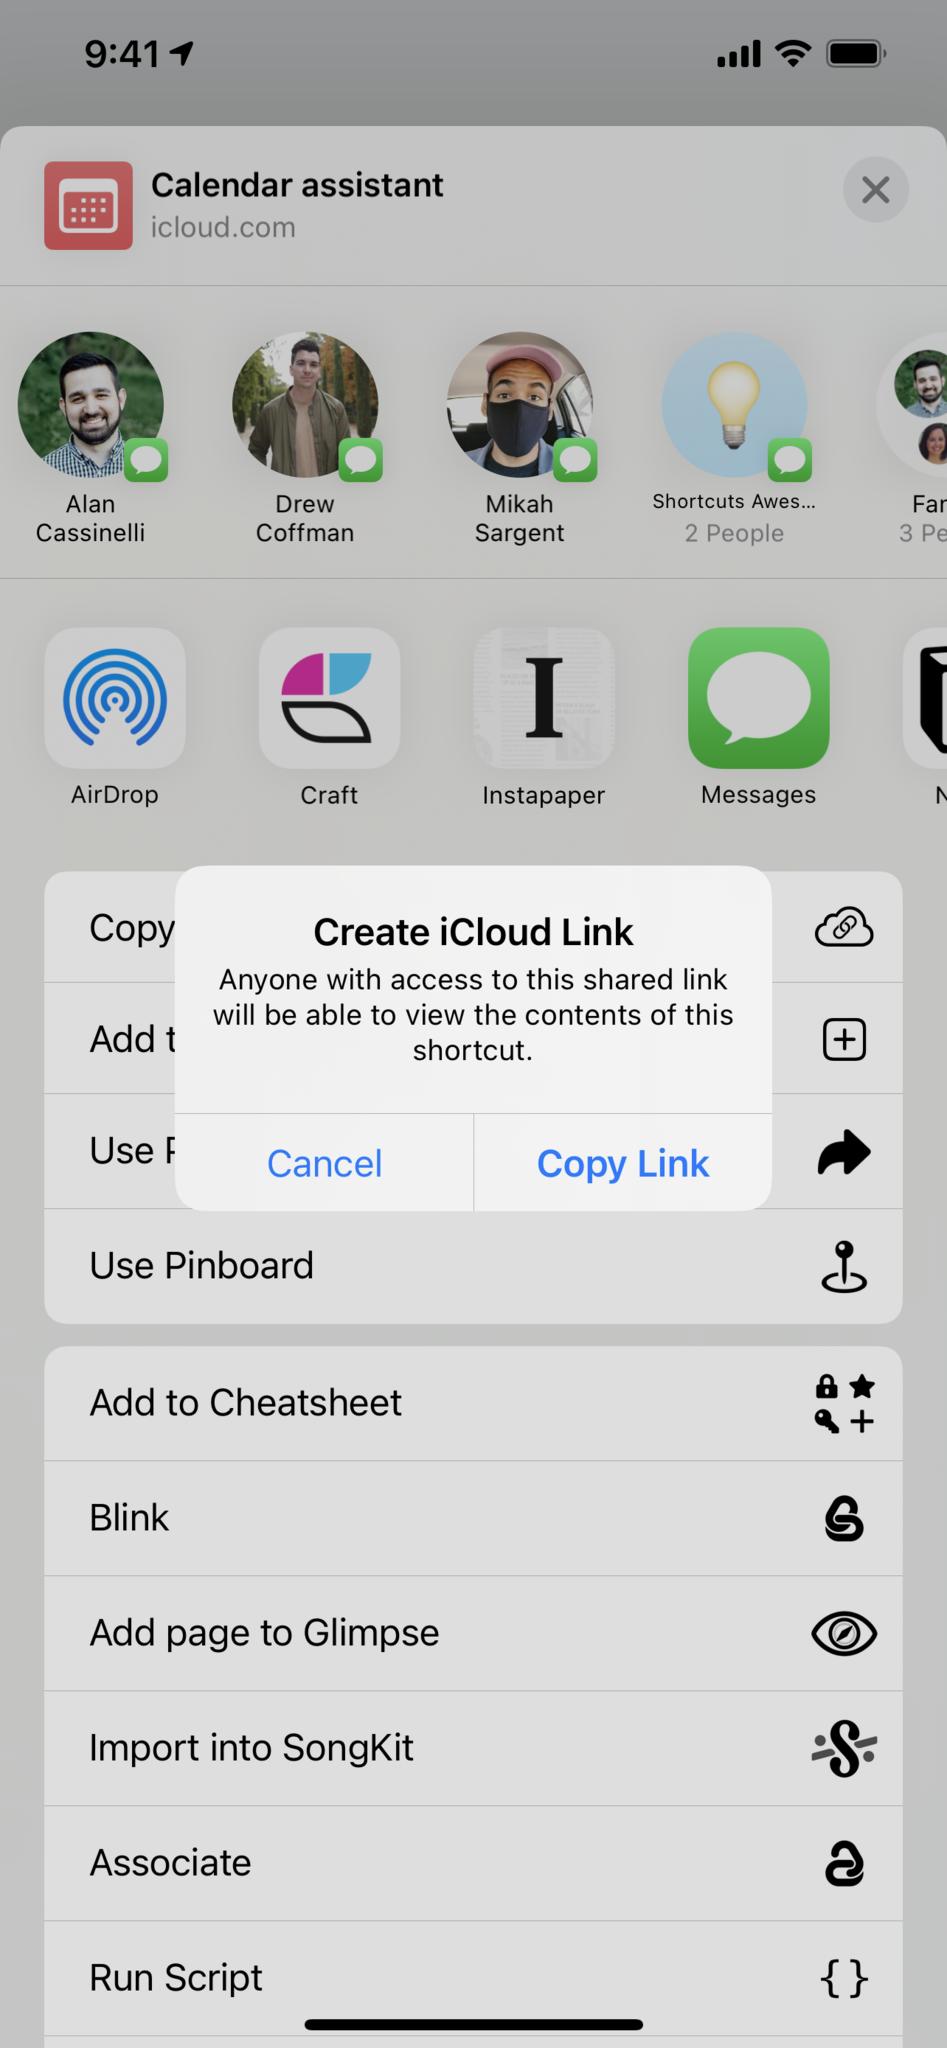 Screenshot of shortcut being shared with dialog for "Create iCloud Link: Anyone with access to this shared link will be able to view the contents of this shortcut."